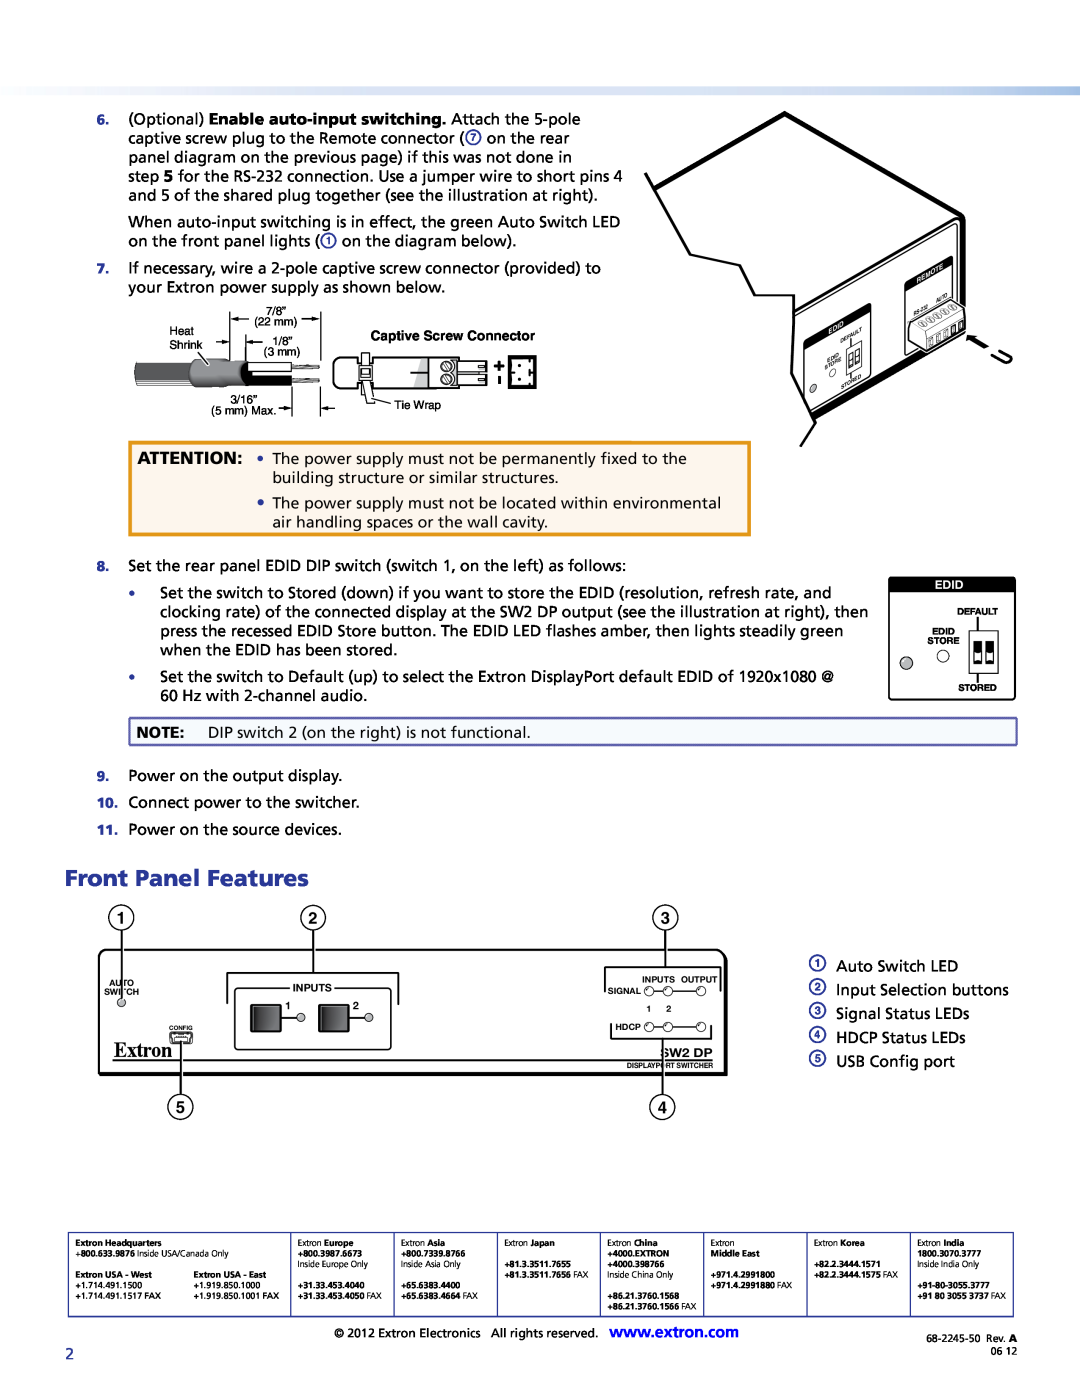 Extron electronic SW2 DP setup guide Front Panel Features, Optional Enable auto-input switching. Attach the 5-pole 